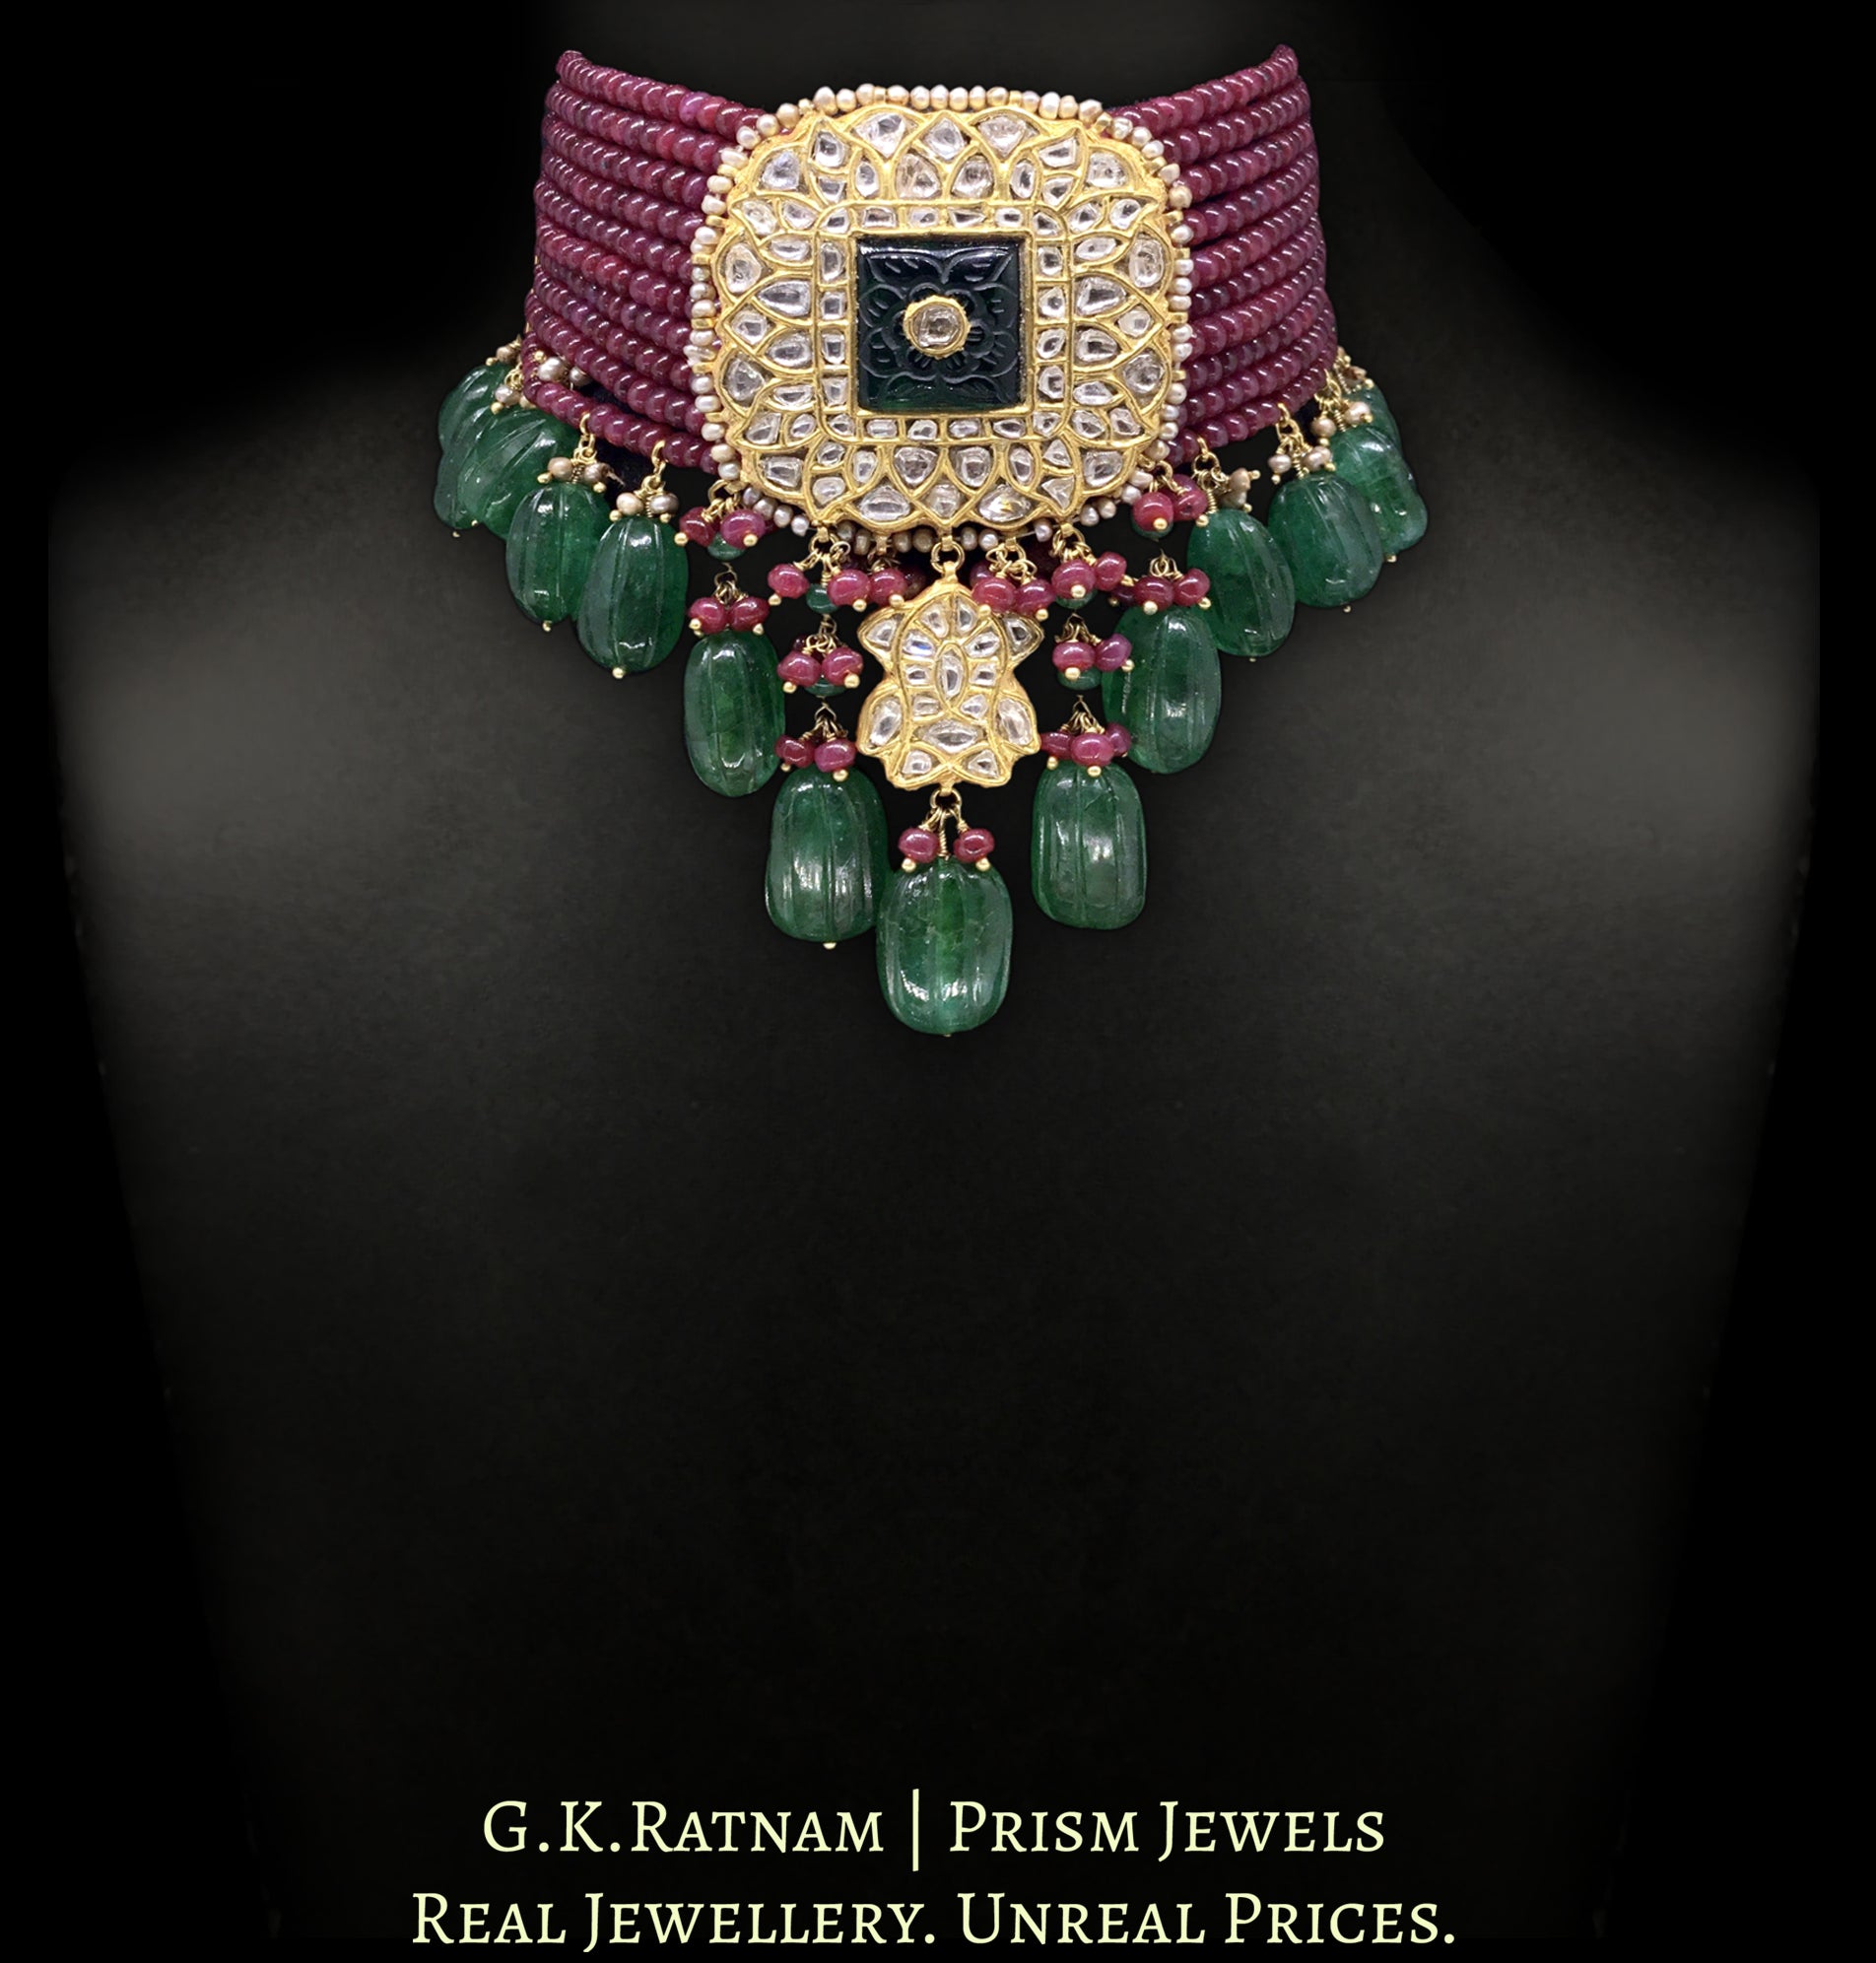 23k Gold and Diamond Polki Choker Necklace strung with Rubies and Green Beryl Melons